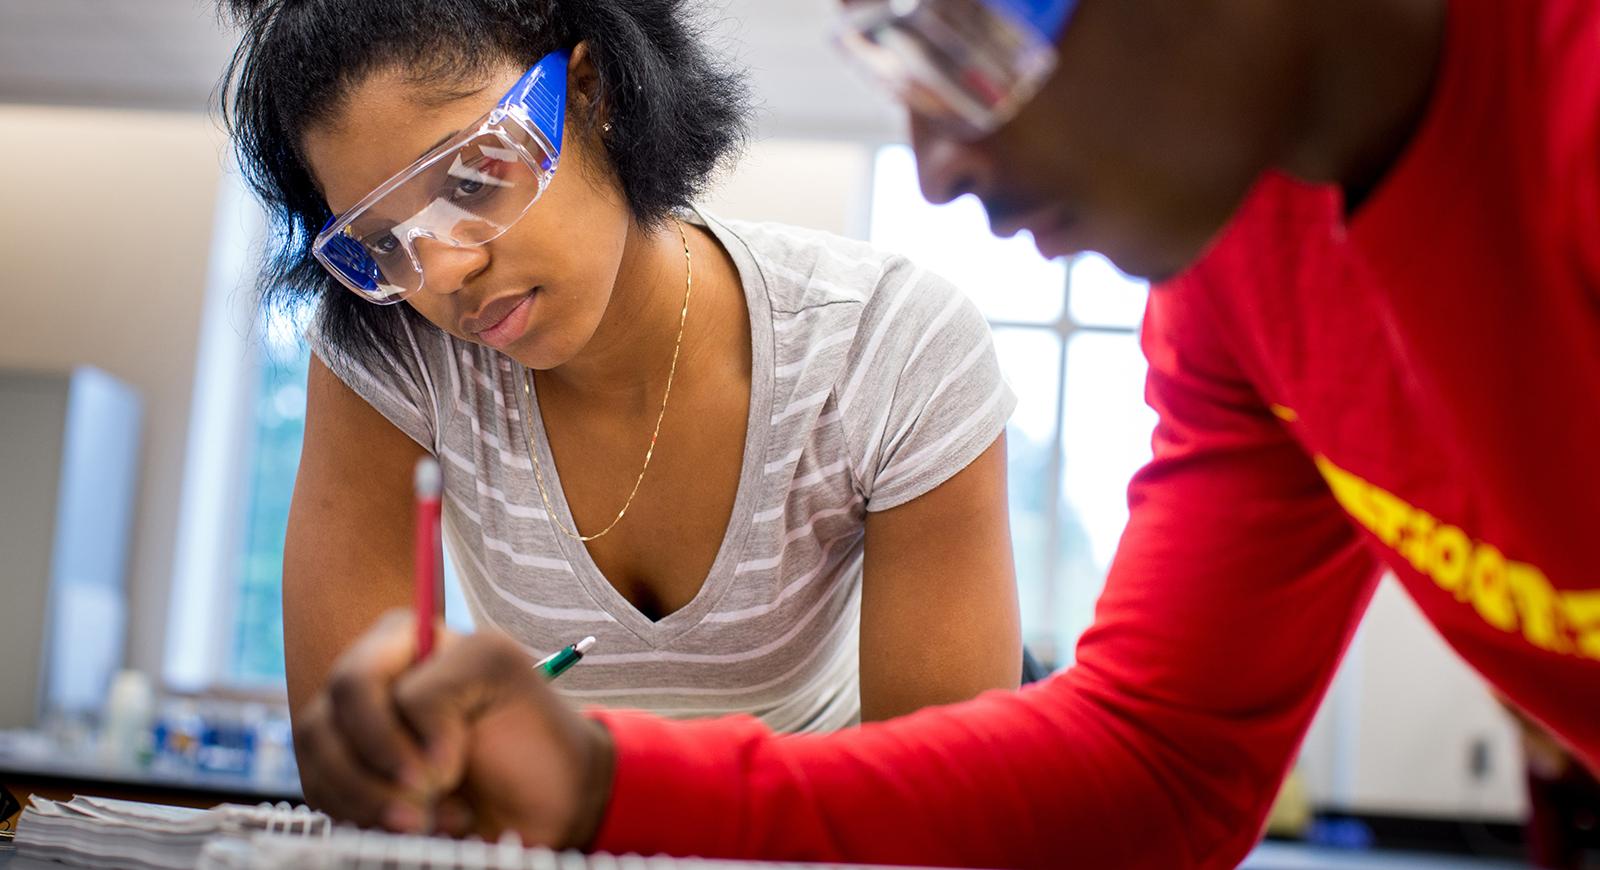 Photo of two Chatham University students working in a chemistry lab wearing protective goggles.